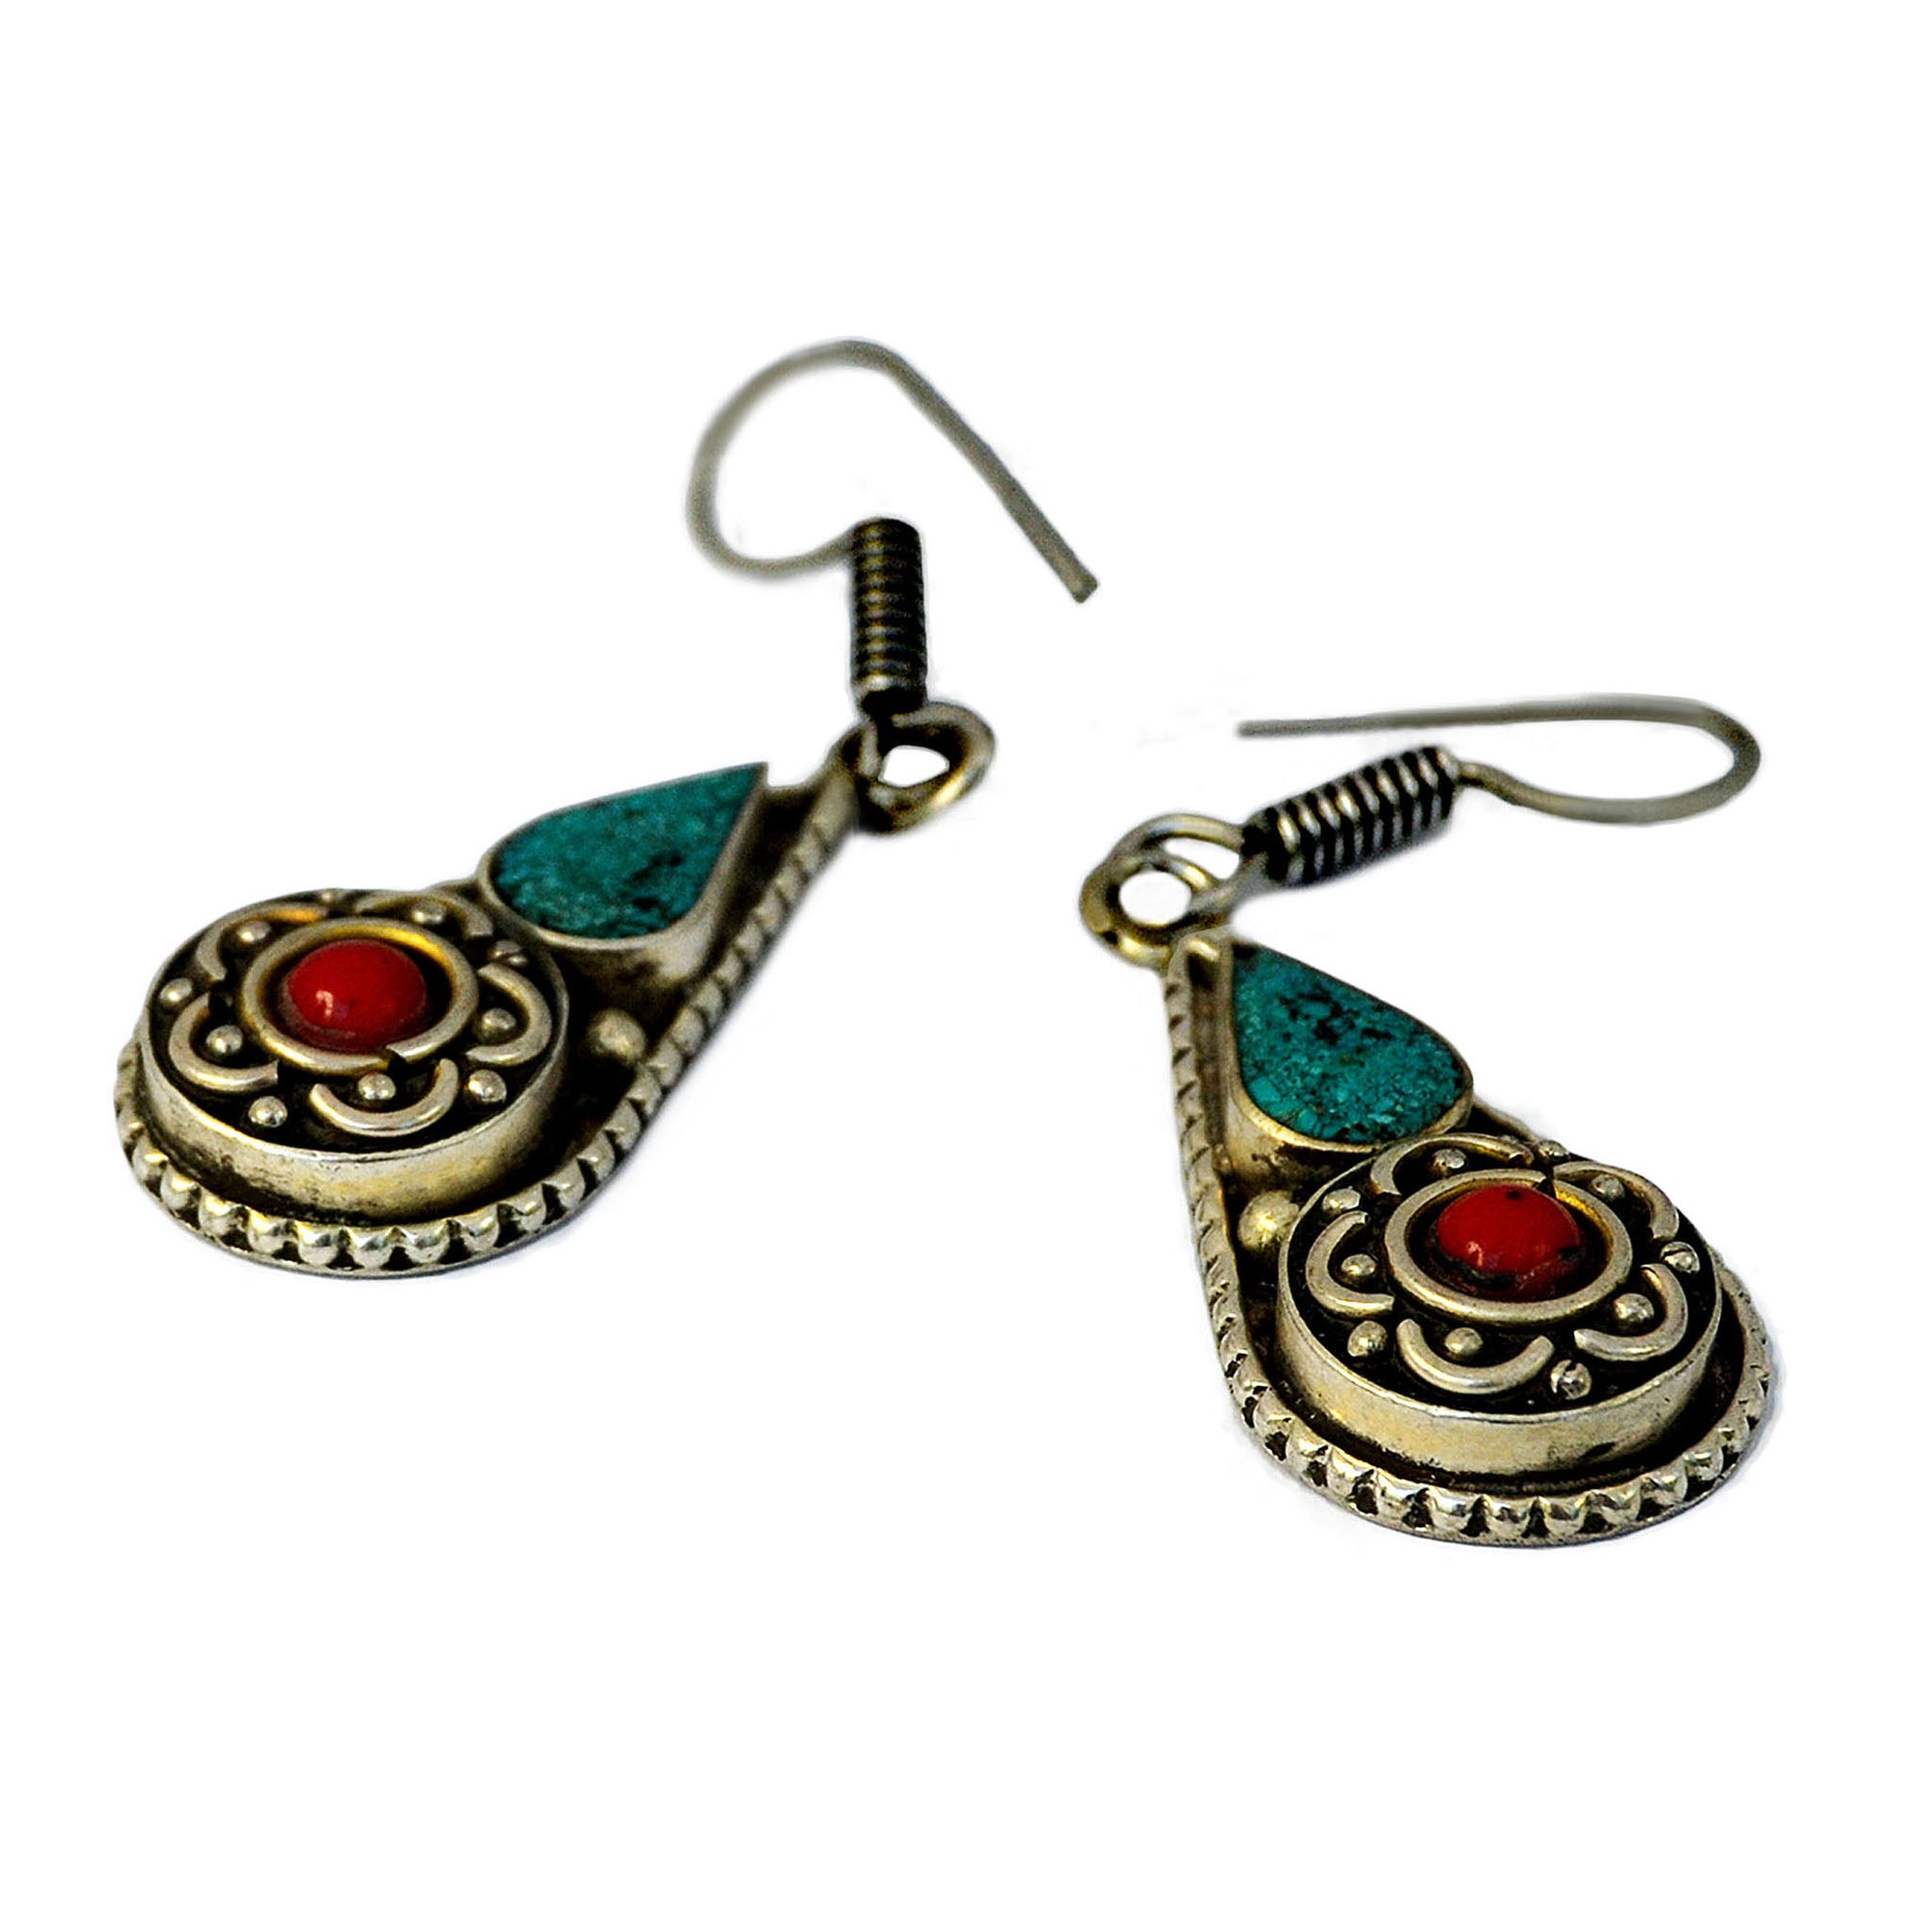 Ethnic drop earrings with inlay turquoise and red coral stones